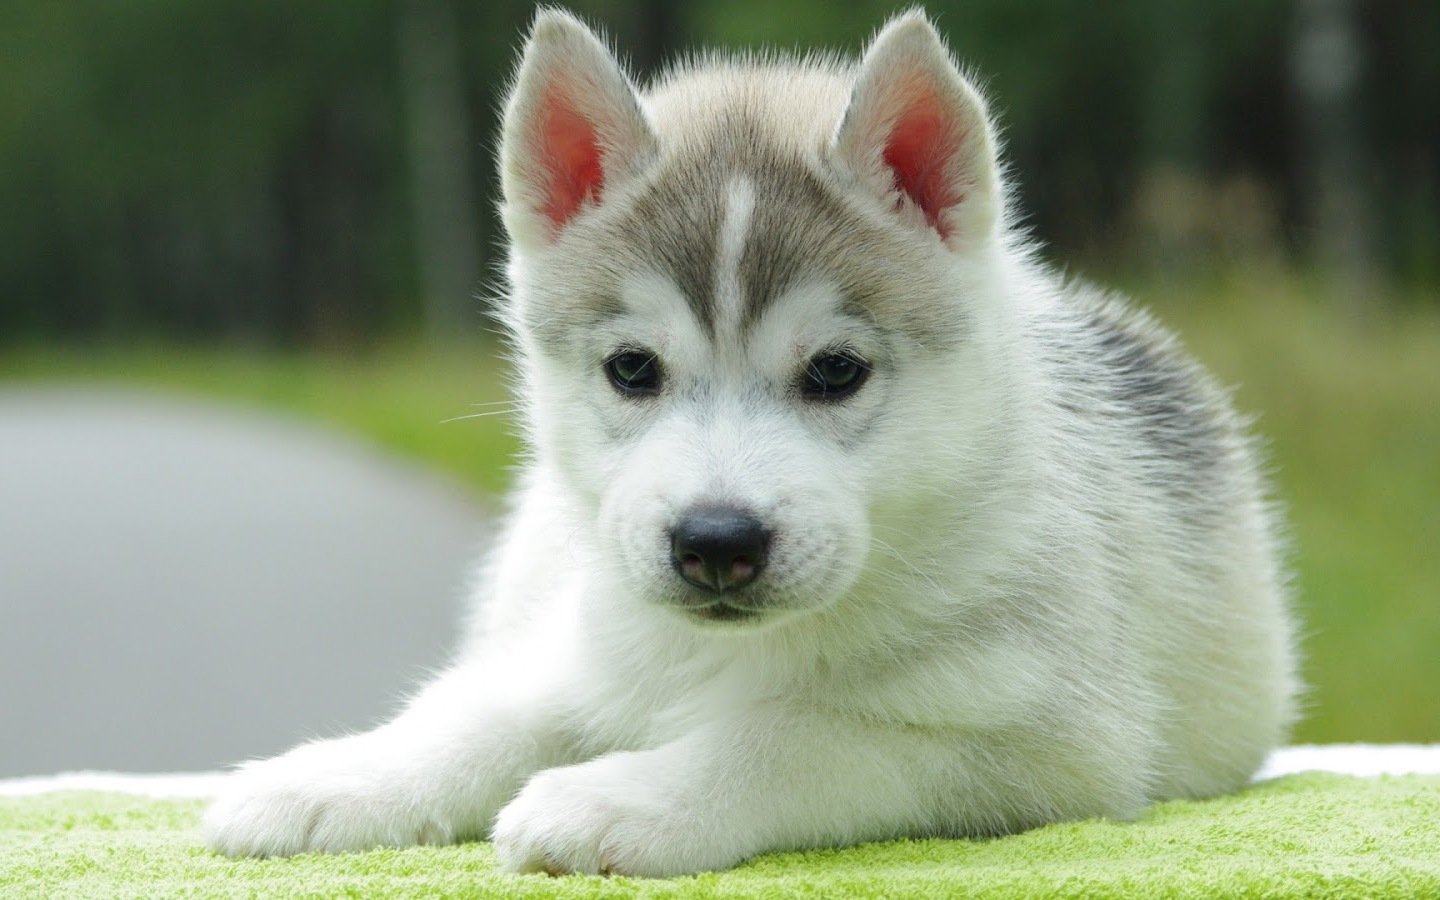  to Cute Puppy Wallpapers for Desktop Mobile Backgrounds Next Image 1440x900